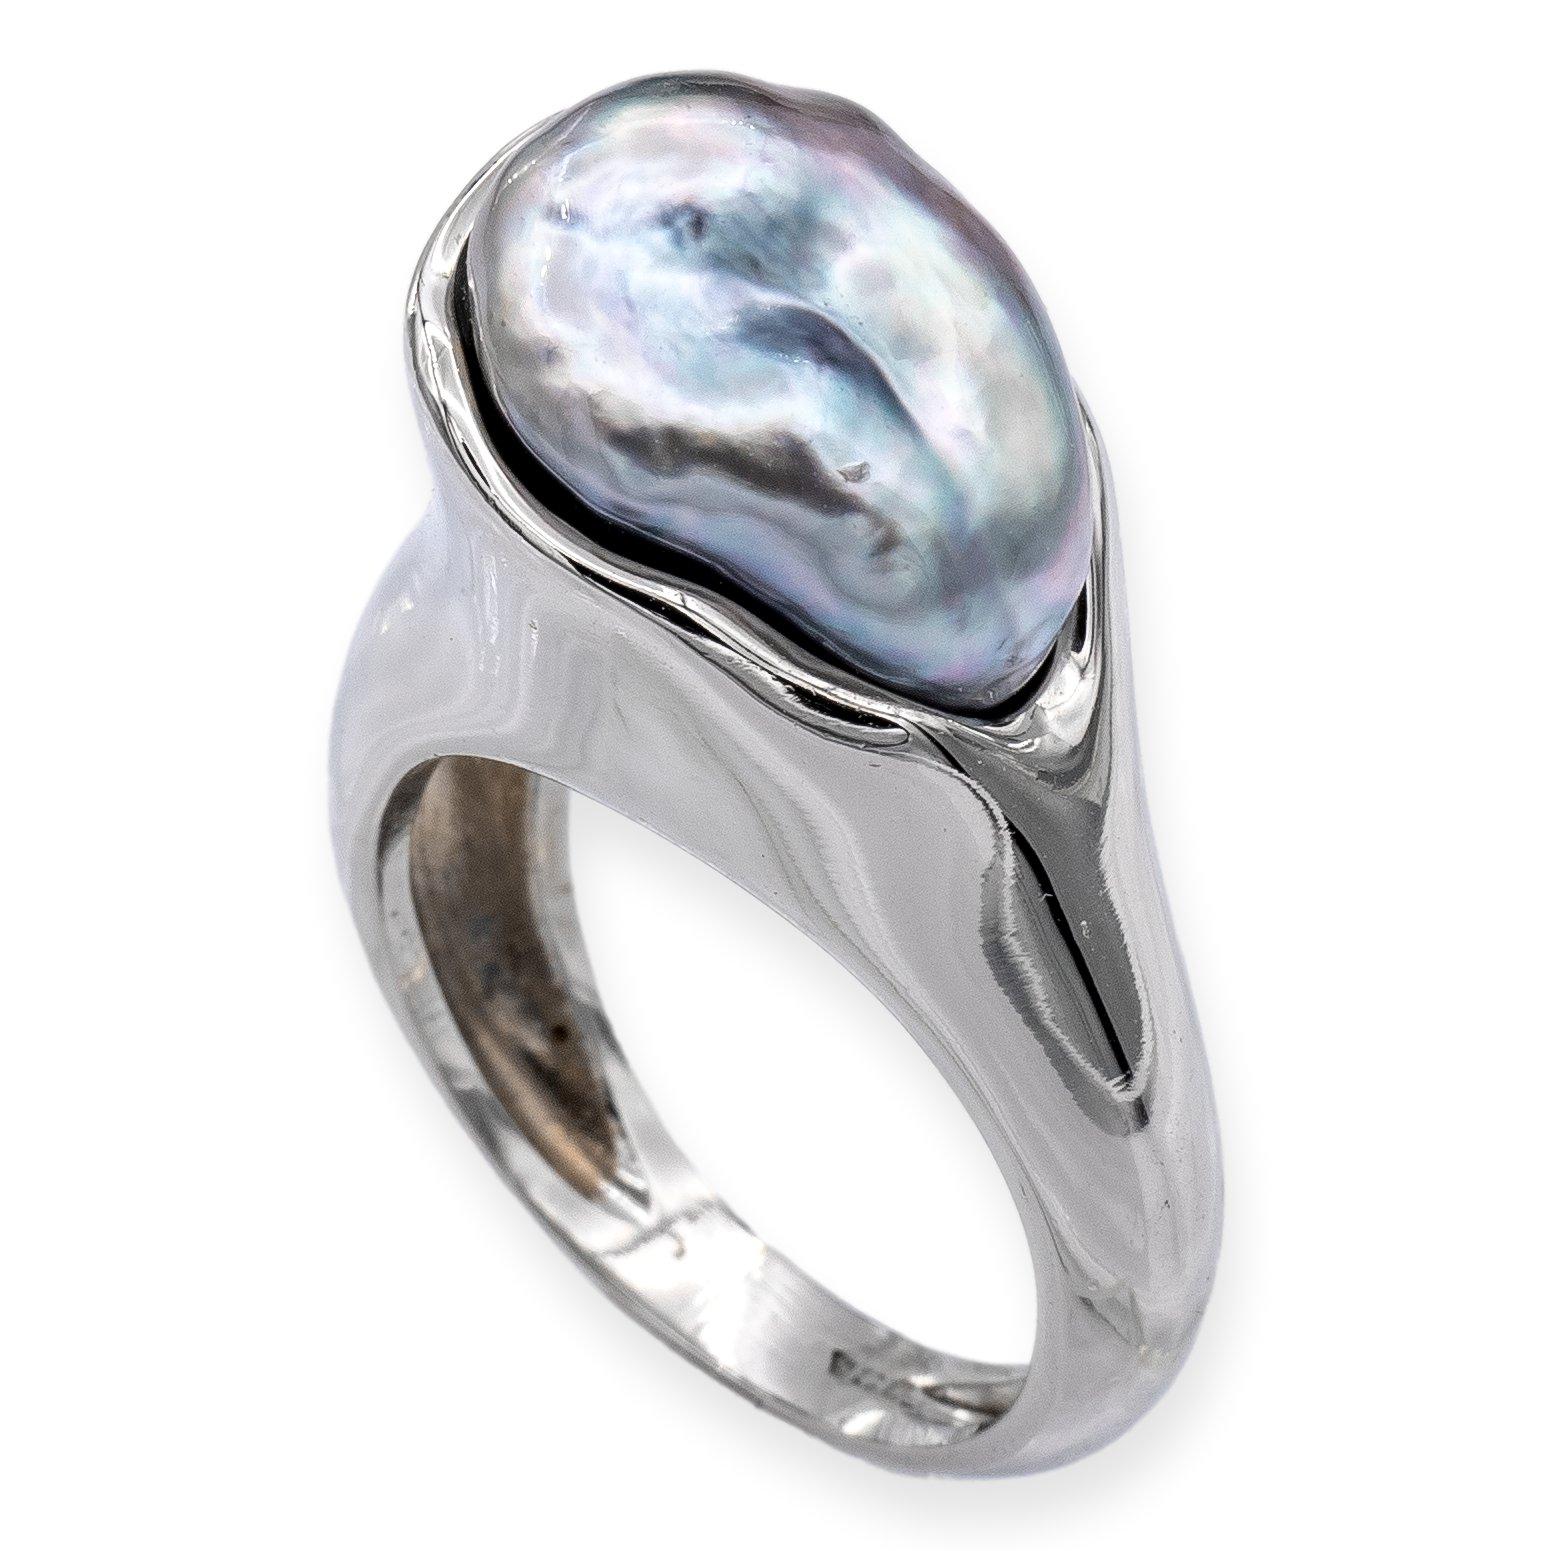 Vintage Tiffany & Co ring designed by Elsa Peretti finely crafted in platinum featuring a Tahitian Baroque pearl center with gray body in color and good luster sitting low on a swirl platinum edge measuring North to South 14.0 mm and sitting 11.0 mm